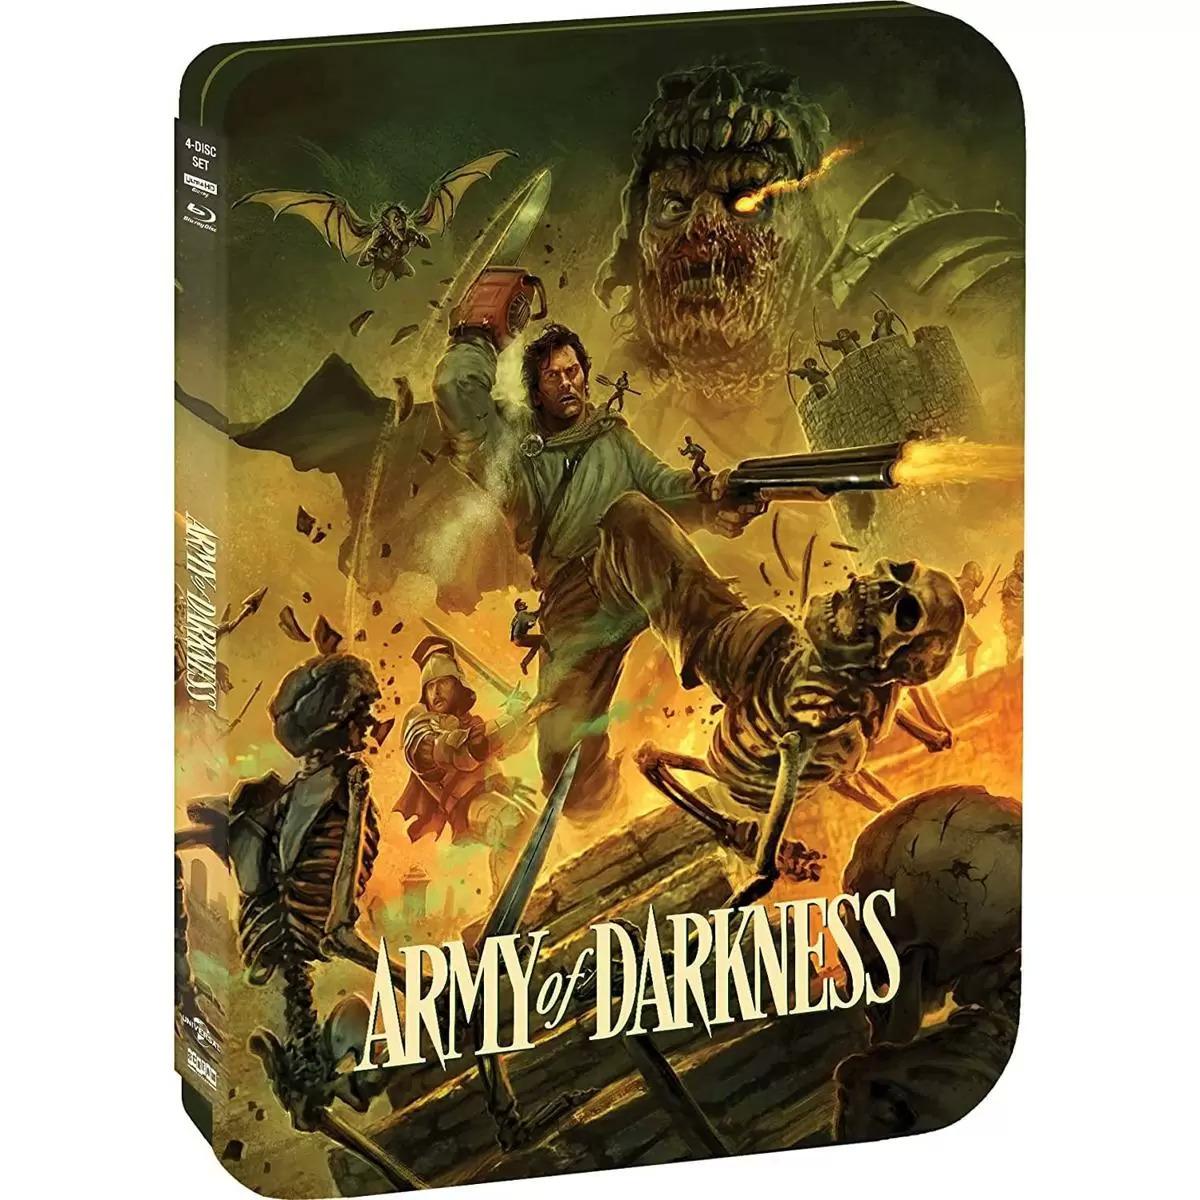 Army of Darkness Limited Edition Steelbook Blu-ray for $19.96